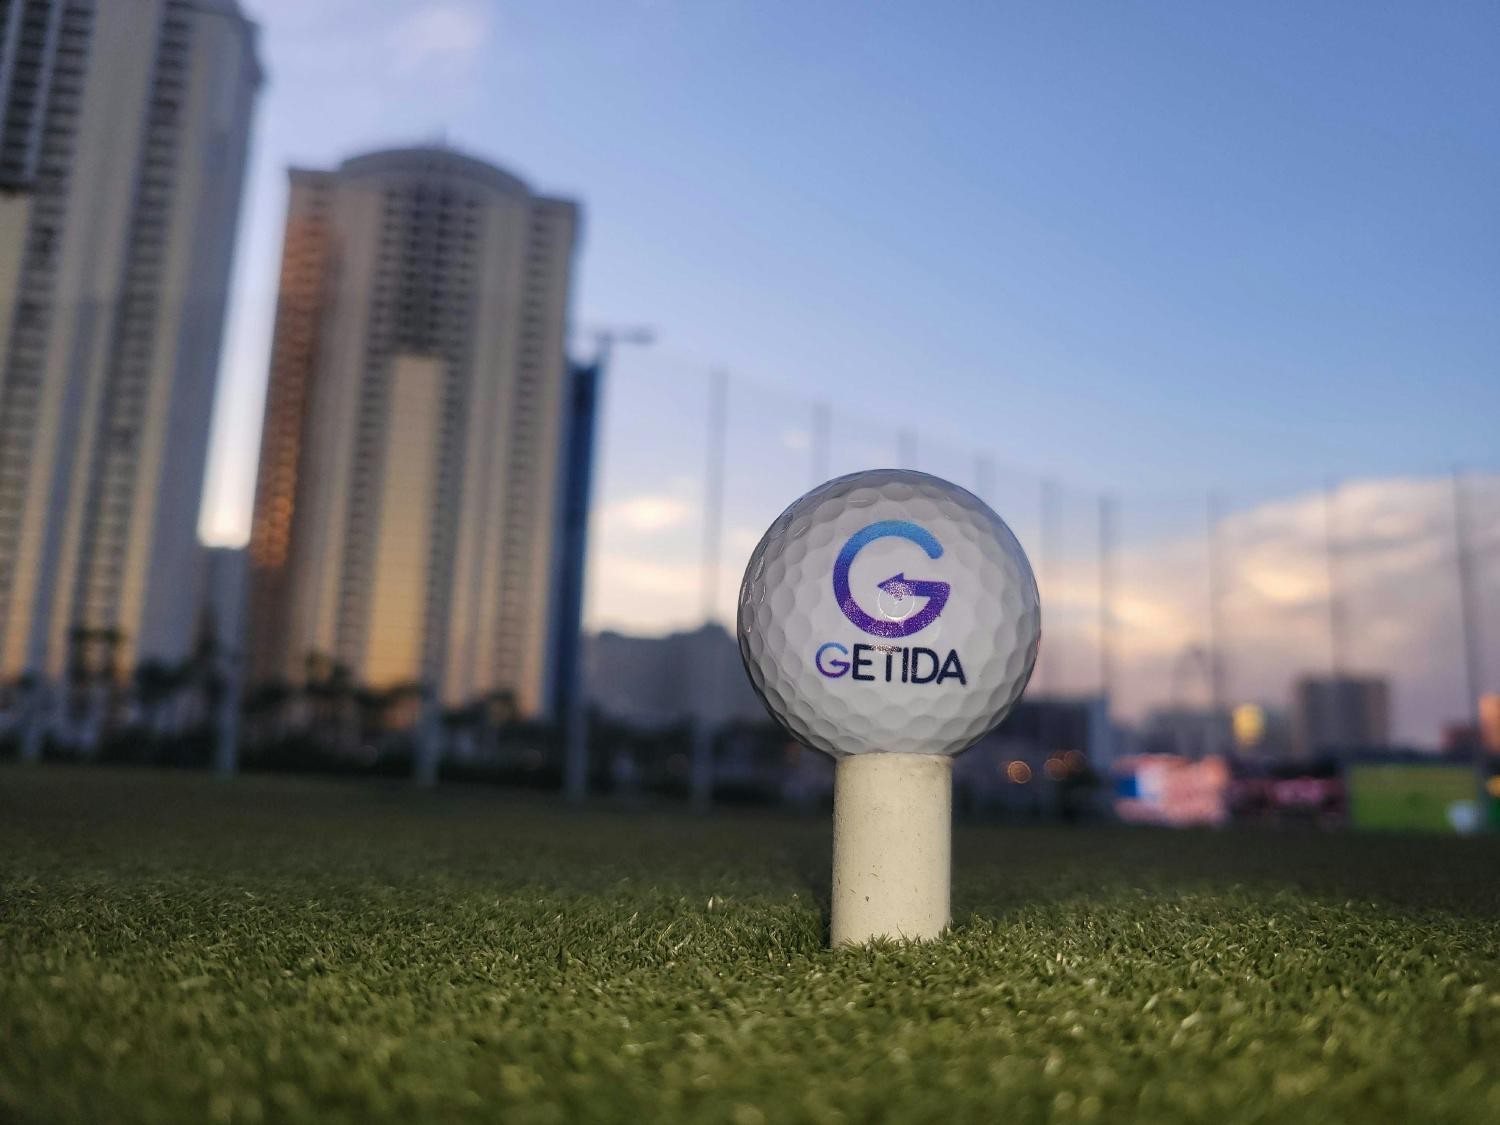 Whoever said work isn’t all fun games never worked at GETIDA!